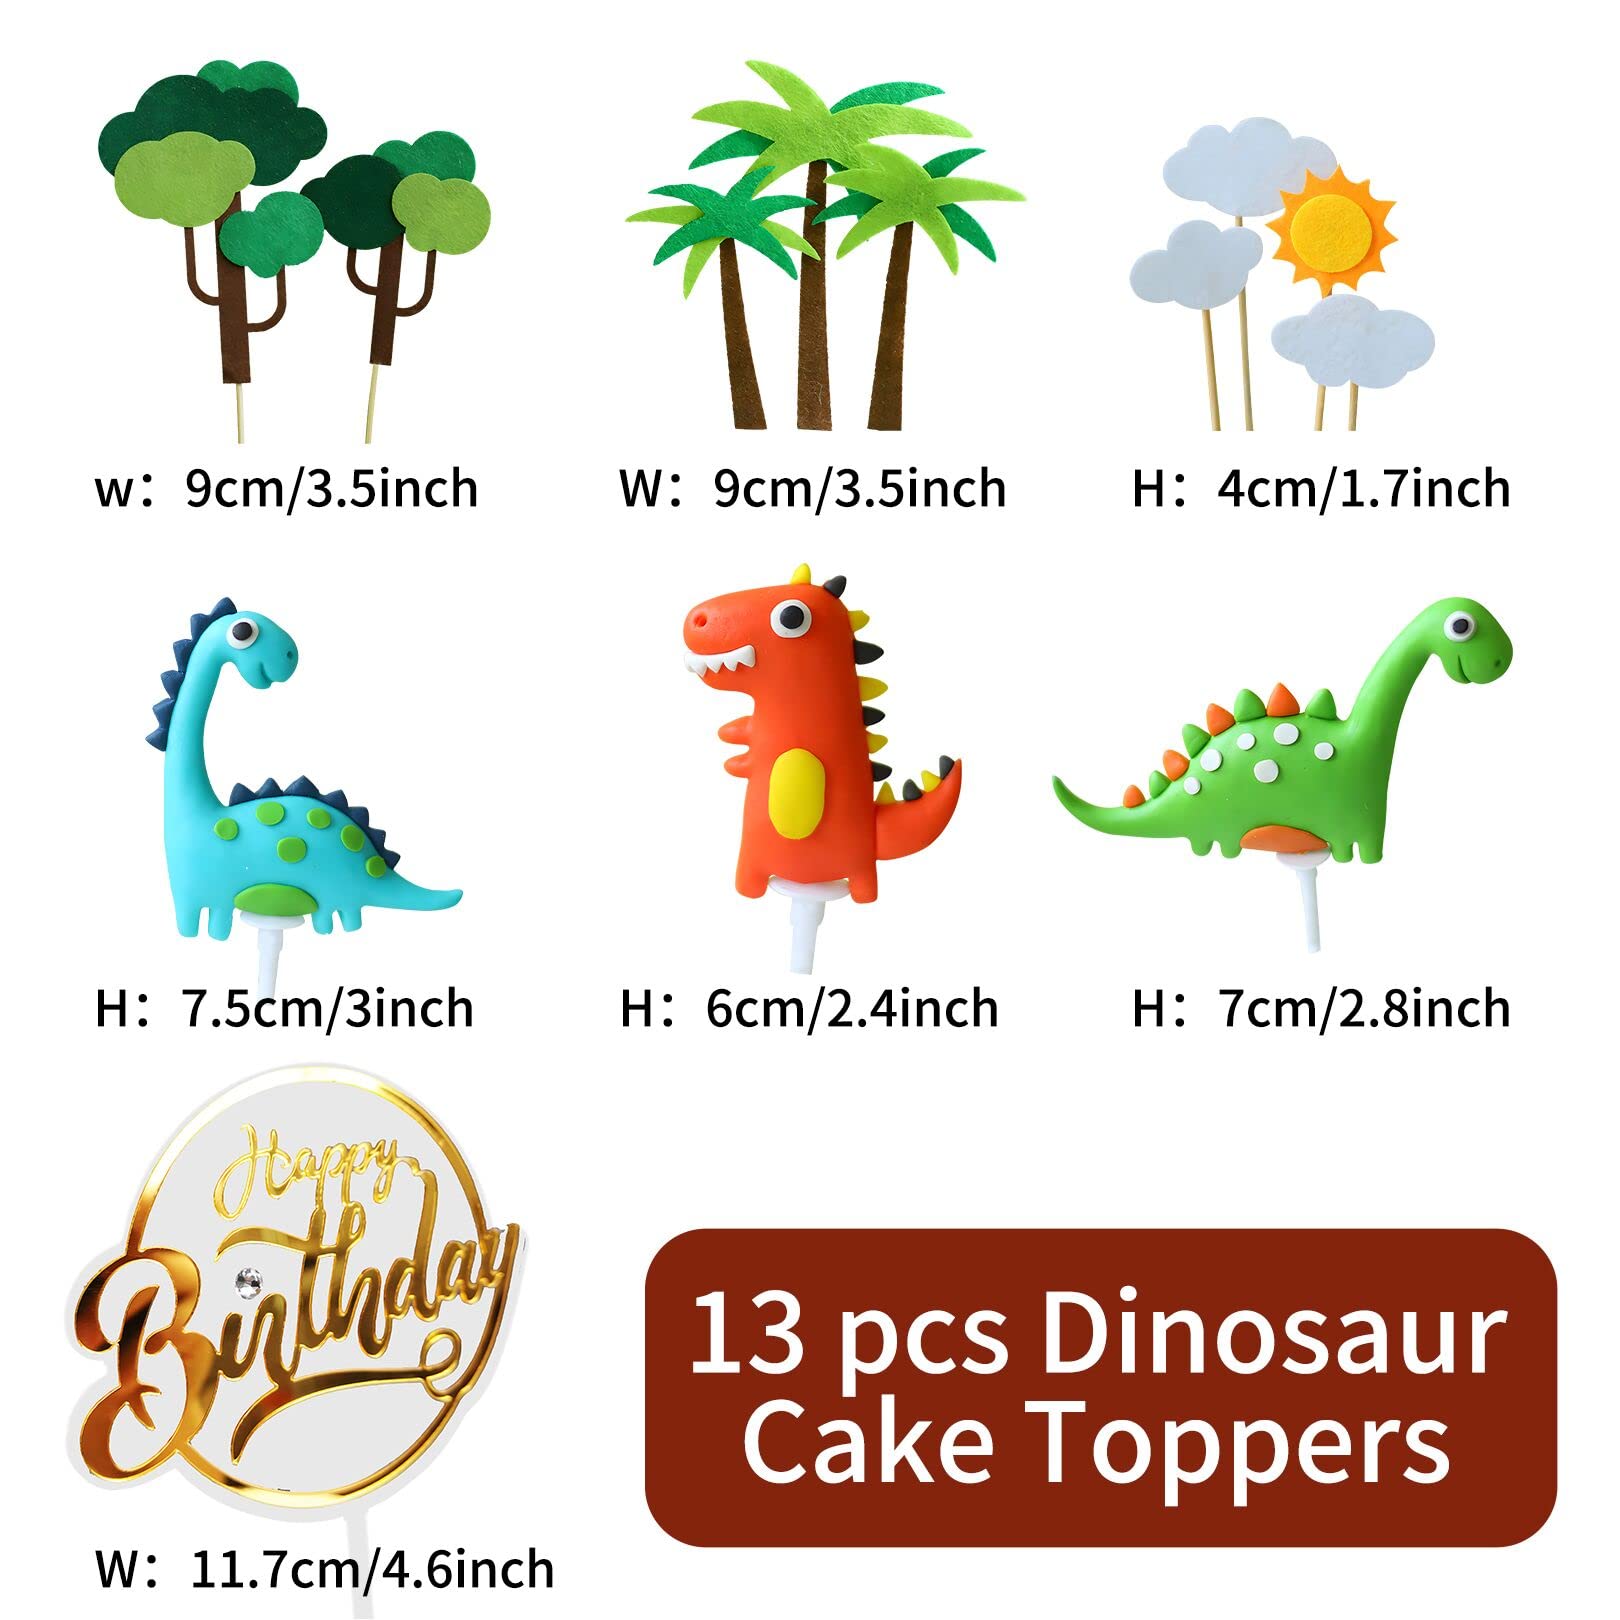 13PCS Cake Toppers, 3D Dinosaur Cake Toppers Decorations, Happy Birthday Cake Toppers Cupcake Topper Cake Decorations Boy Girl Kids Dinosaur Themed Party Decorations Birthday Party Supplies